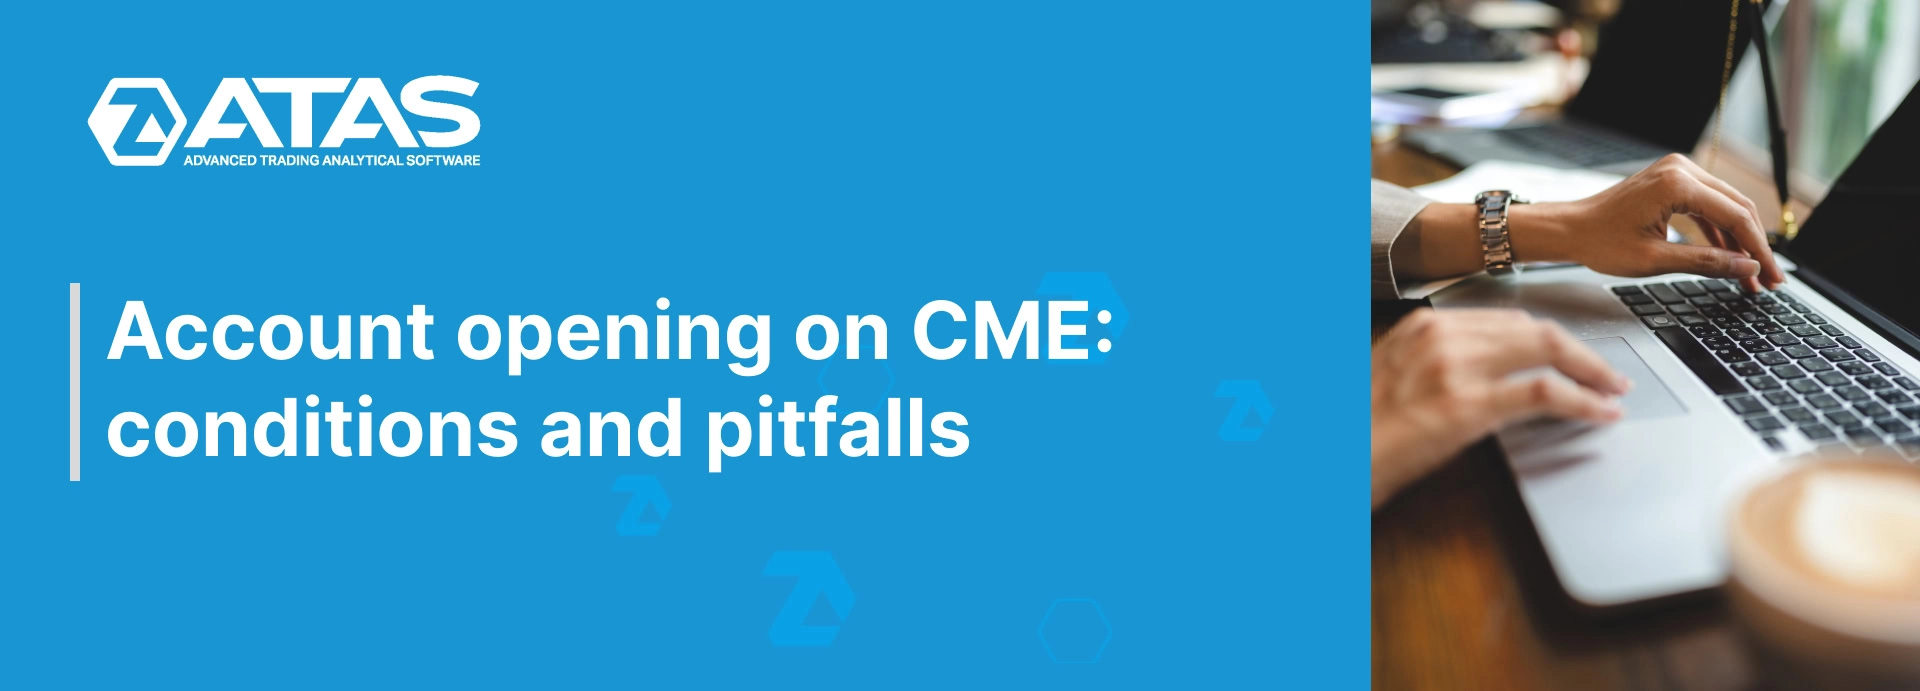 Account opening on CME conditions and pitfalls